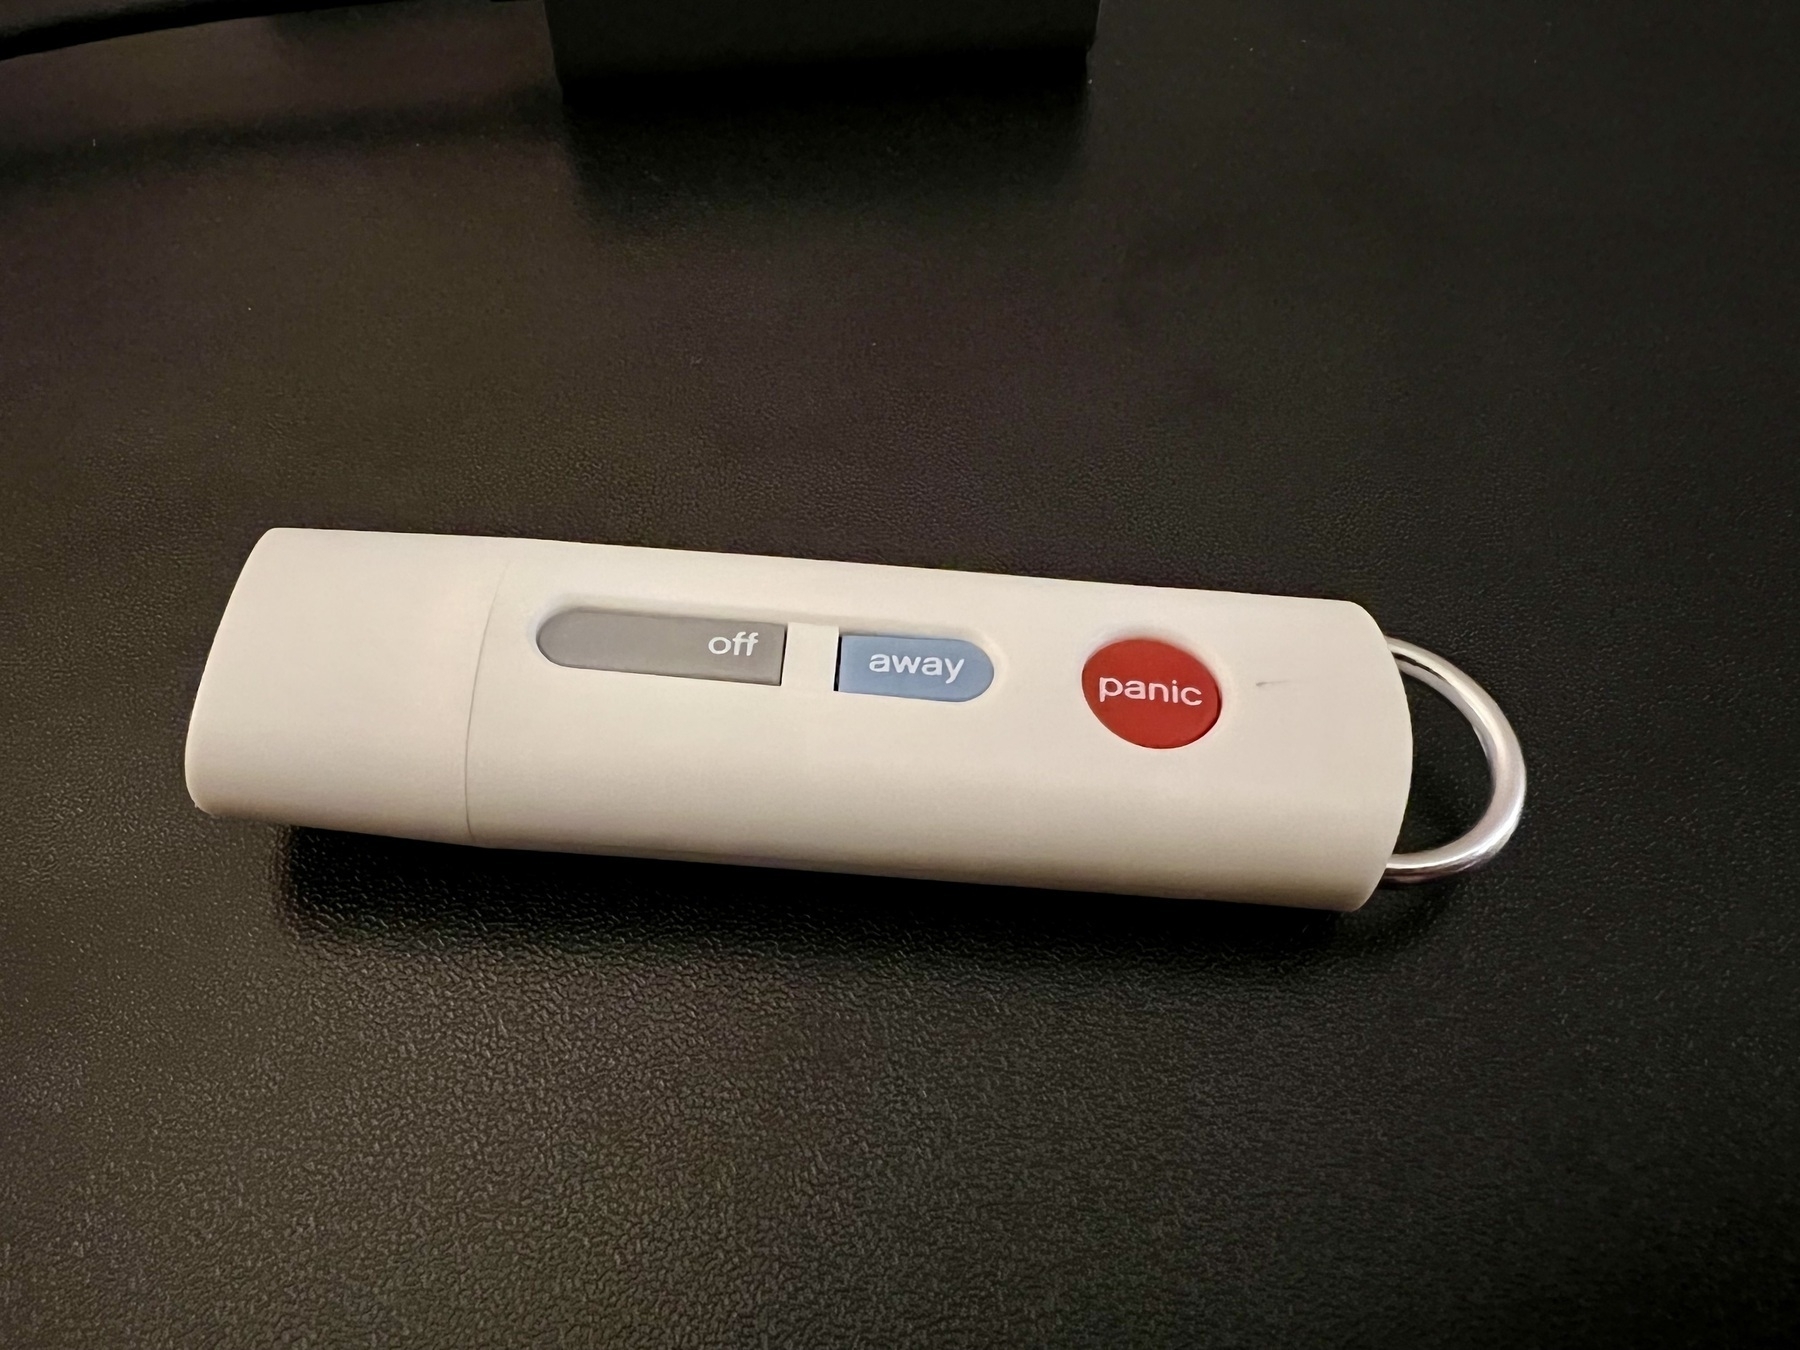 Plastic dongle on a table, with three buttons on it; 'off' in grey, 'away' in blue, and 'panic' in red.